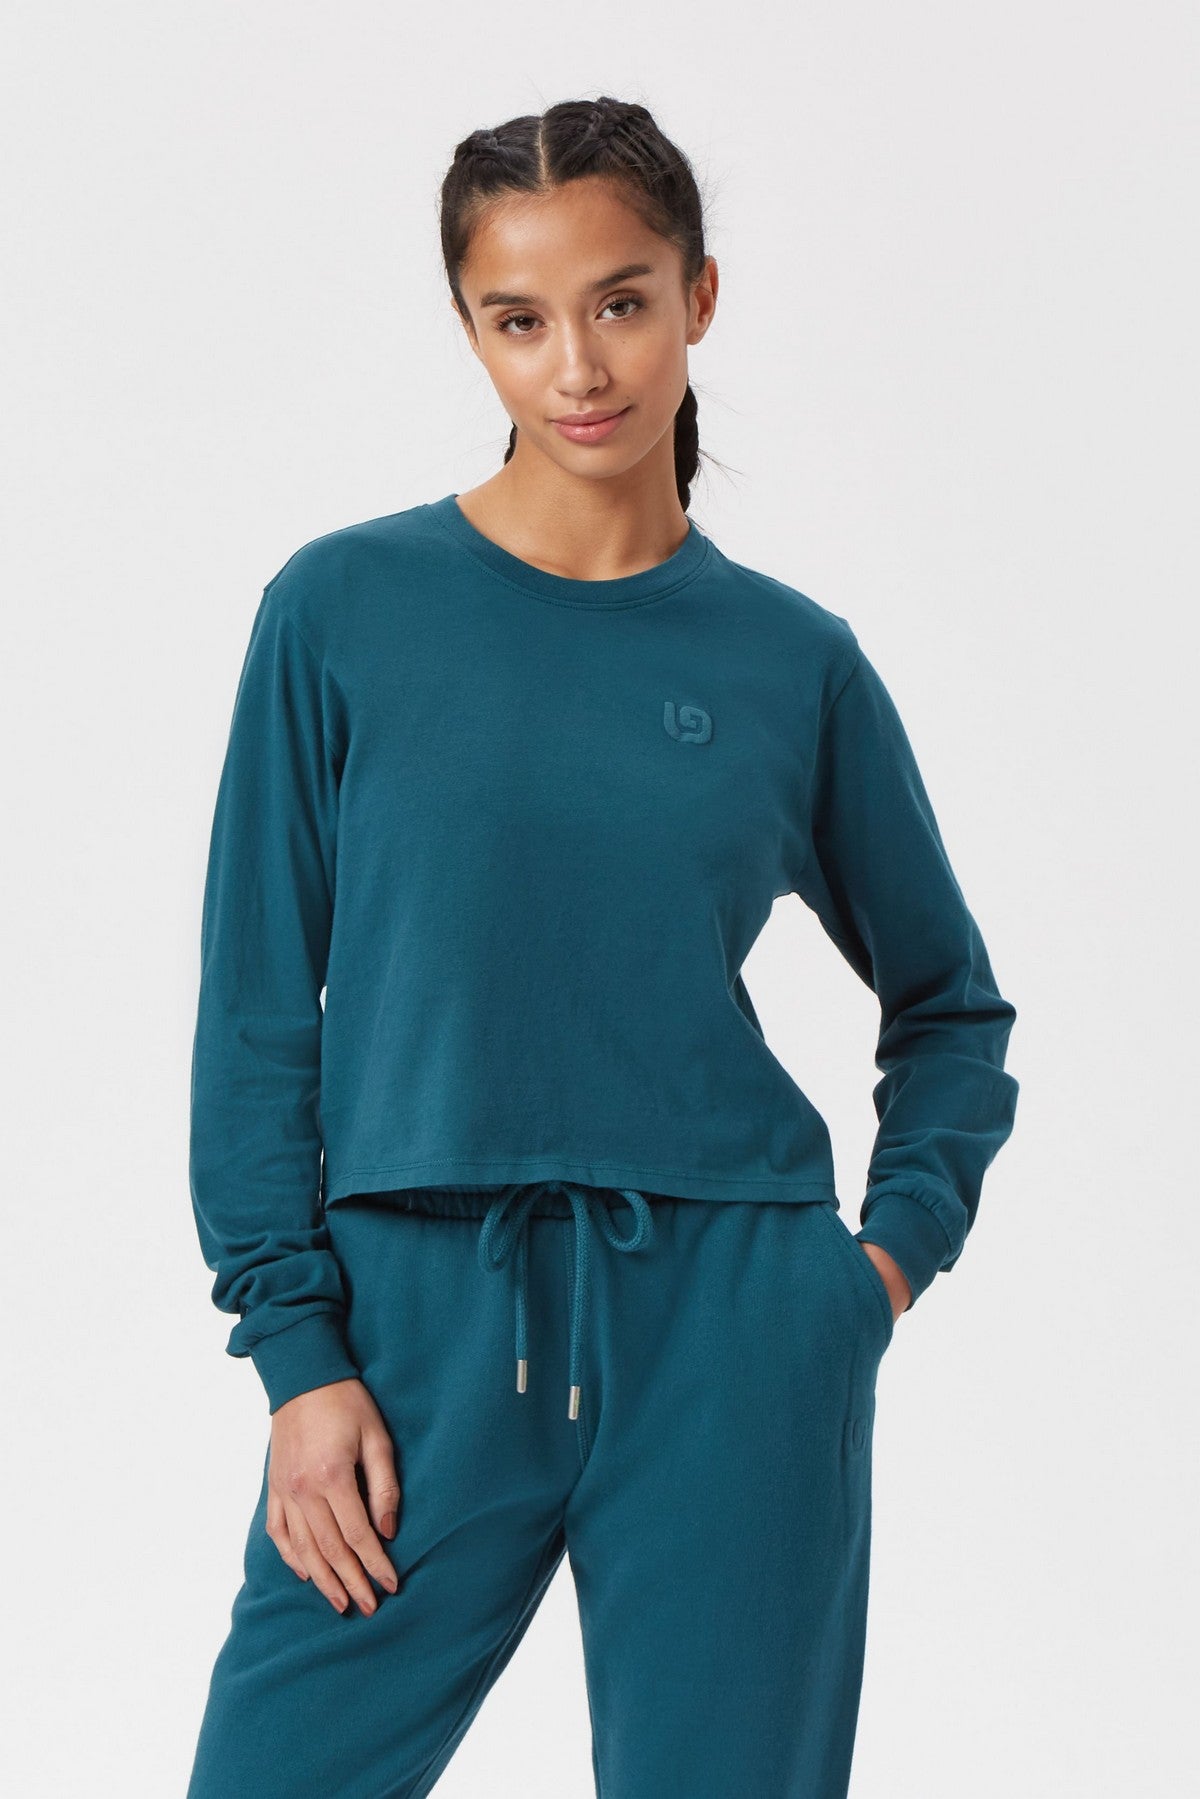 MAJI 'G' COLLECTION LONG SLEEVE CROPPED T - DEEP TEAL - THAT GORILLA BRAND